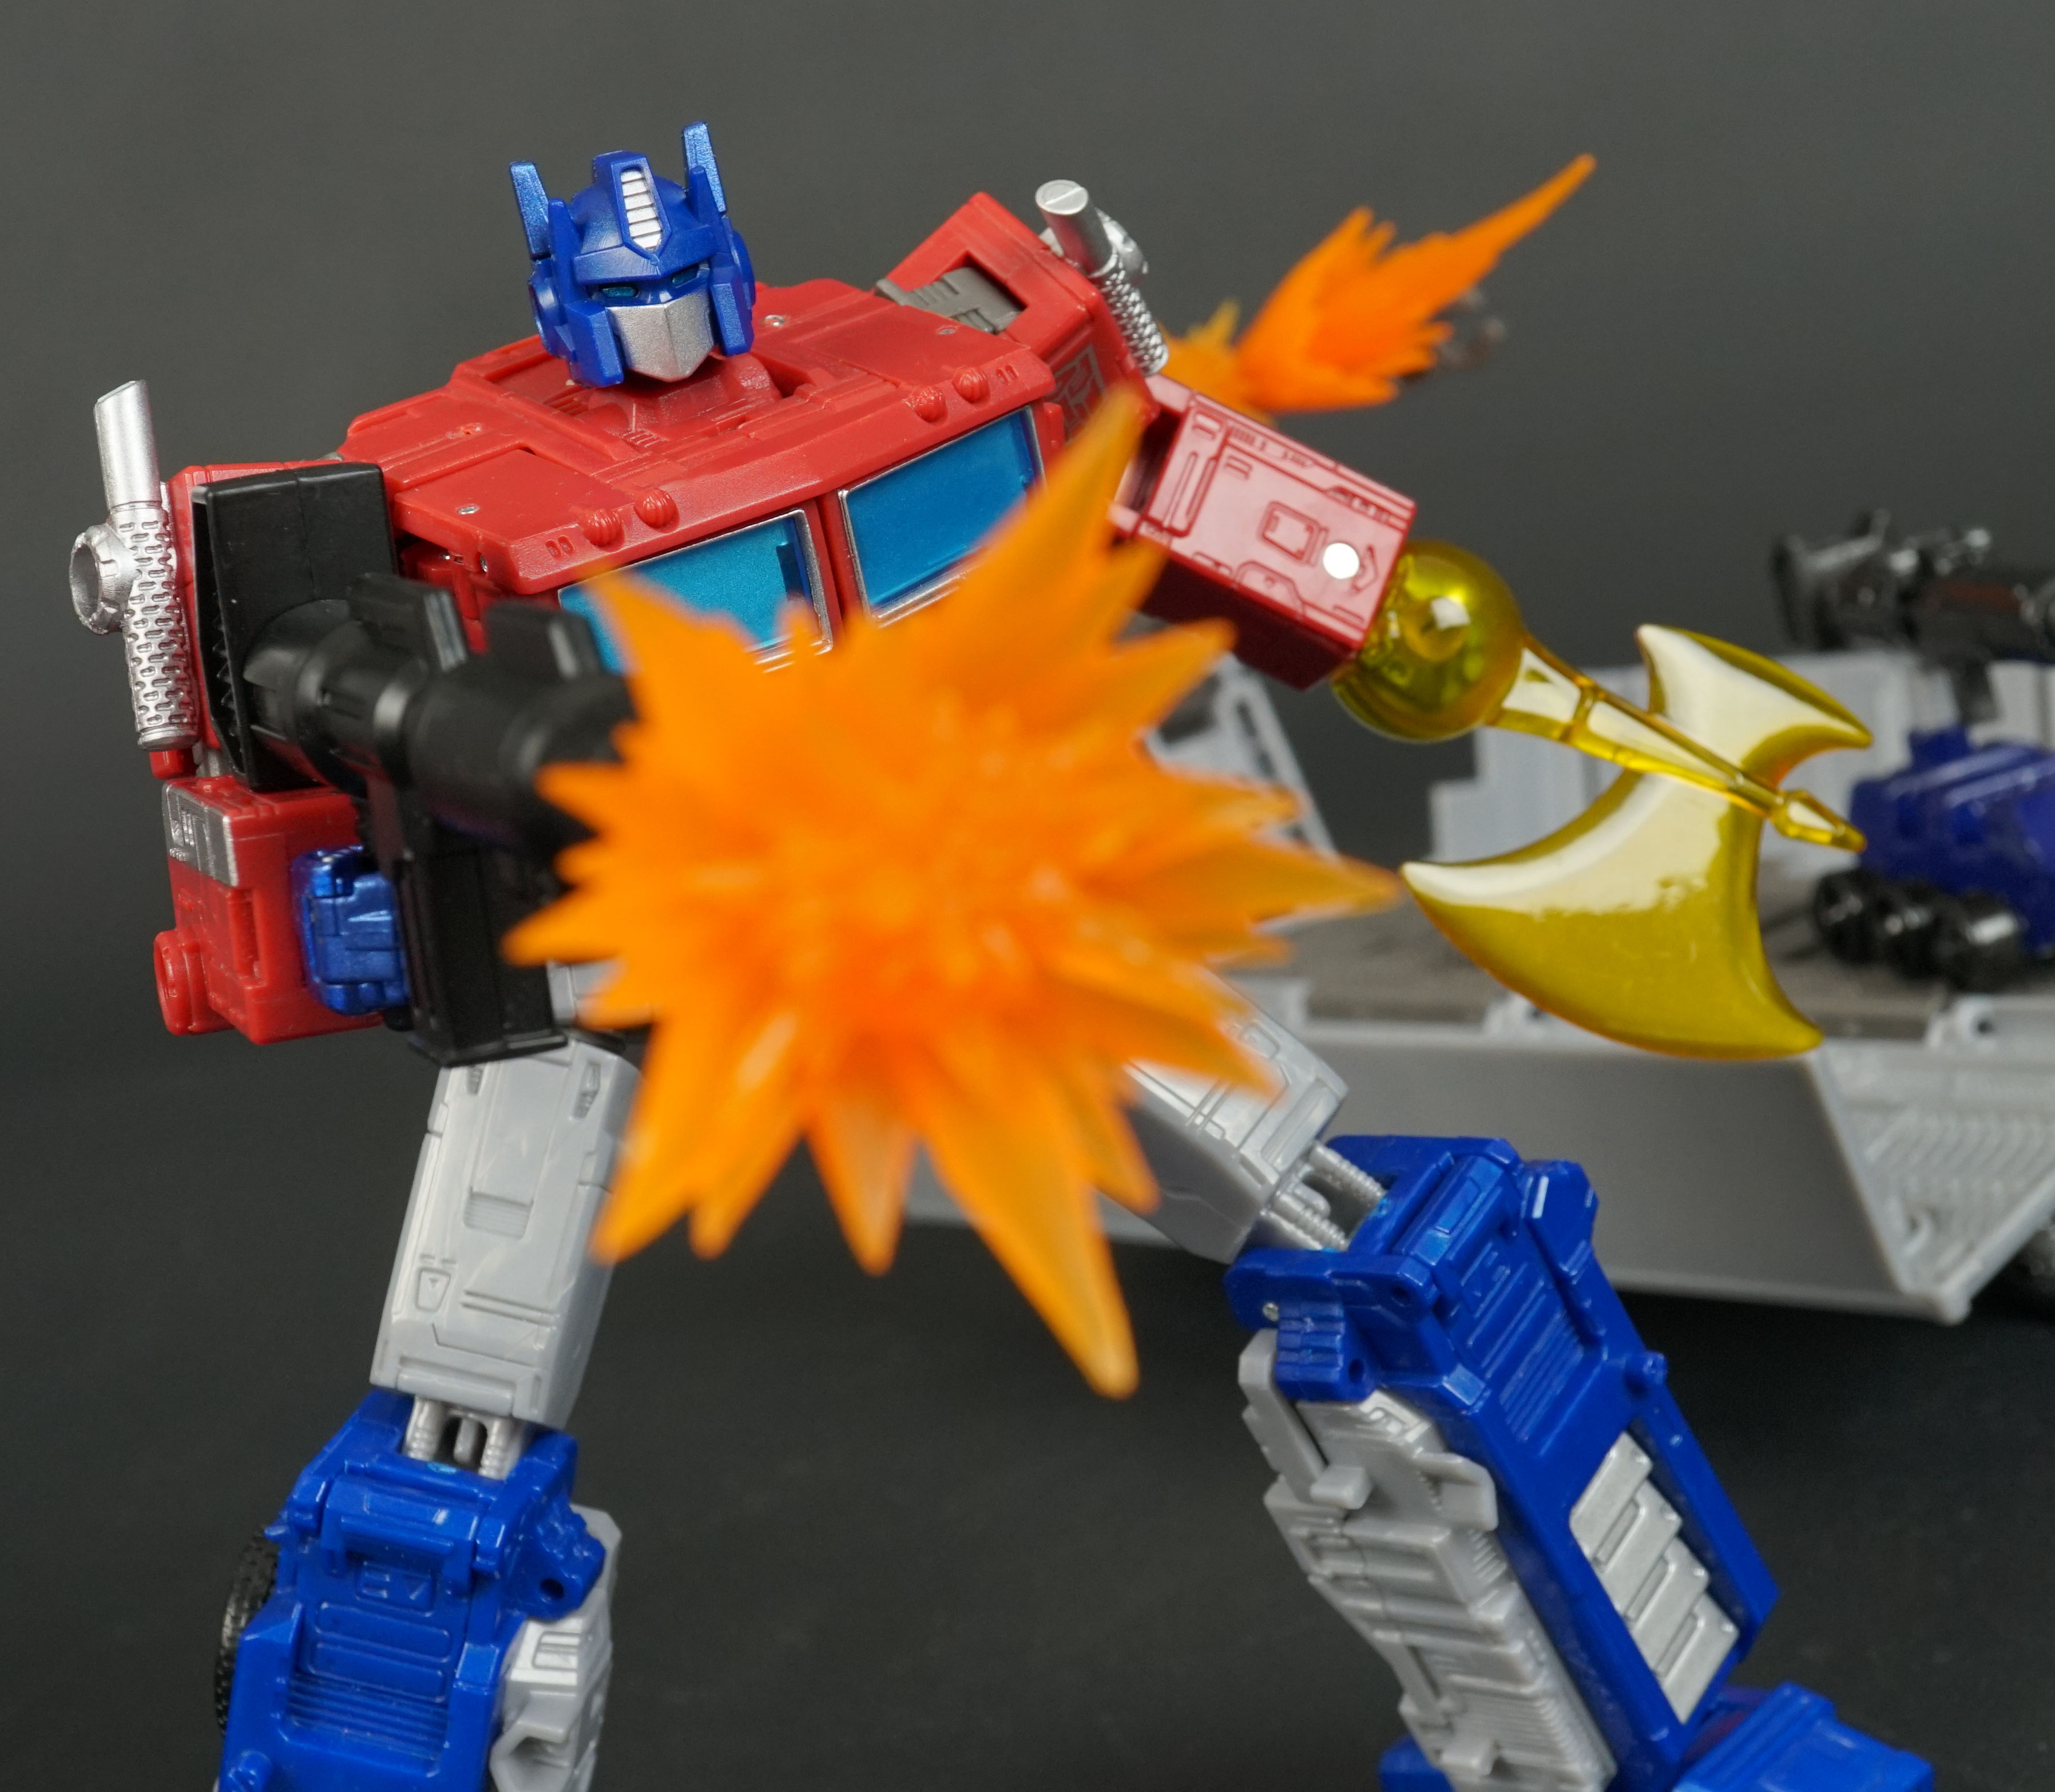 Details about  / TAKARA TOMY HASBRO WFC-E11 Earthrise OPTIMUS PRIME Transformers Action figure